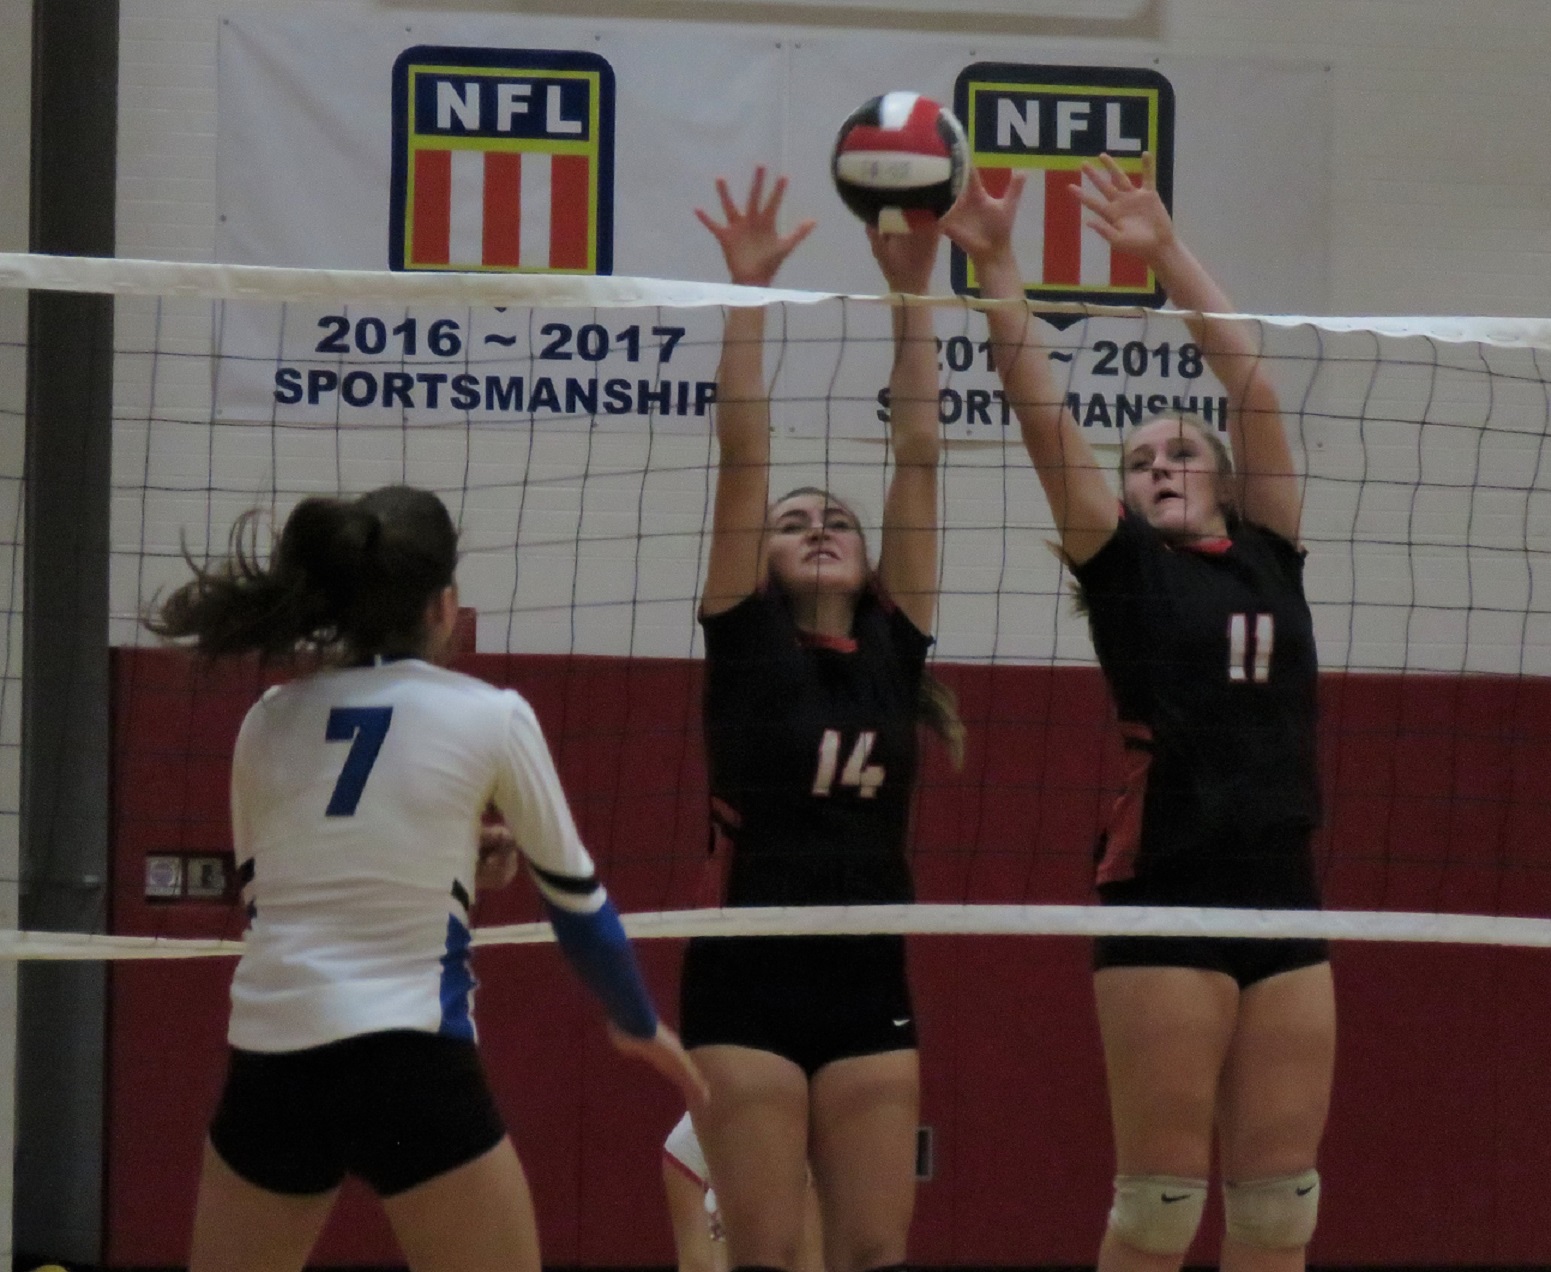 Niagara-Wheatfield's Emily Quider (14) and Elanna Lysiak (11) block a spike from Grand Island's Sara Frosolone during Thursday night's victory. (Photo by David Yarger)